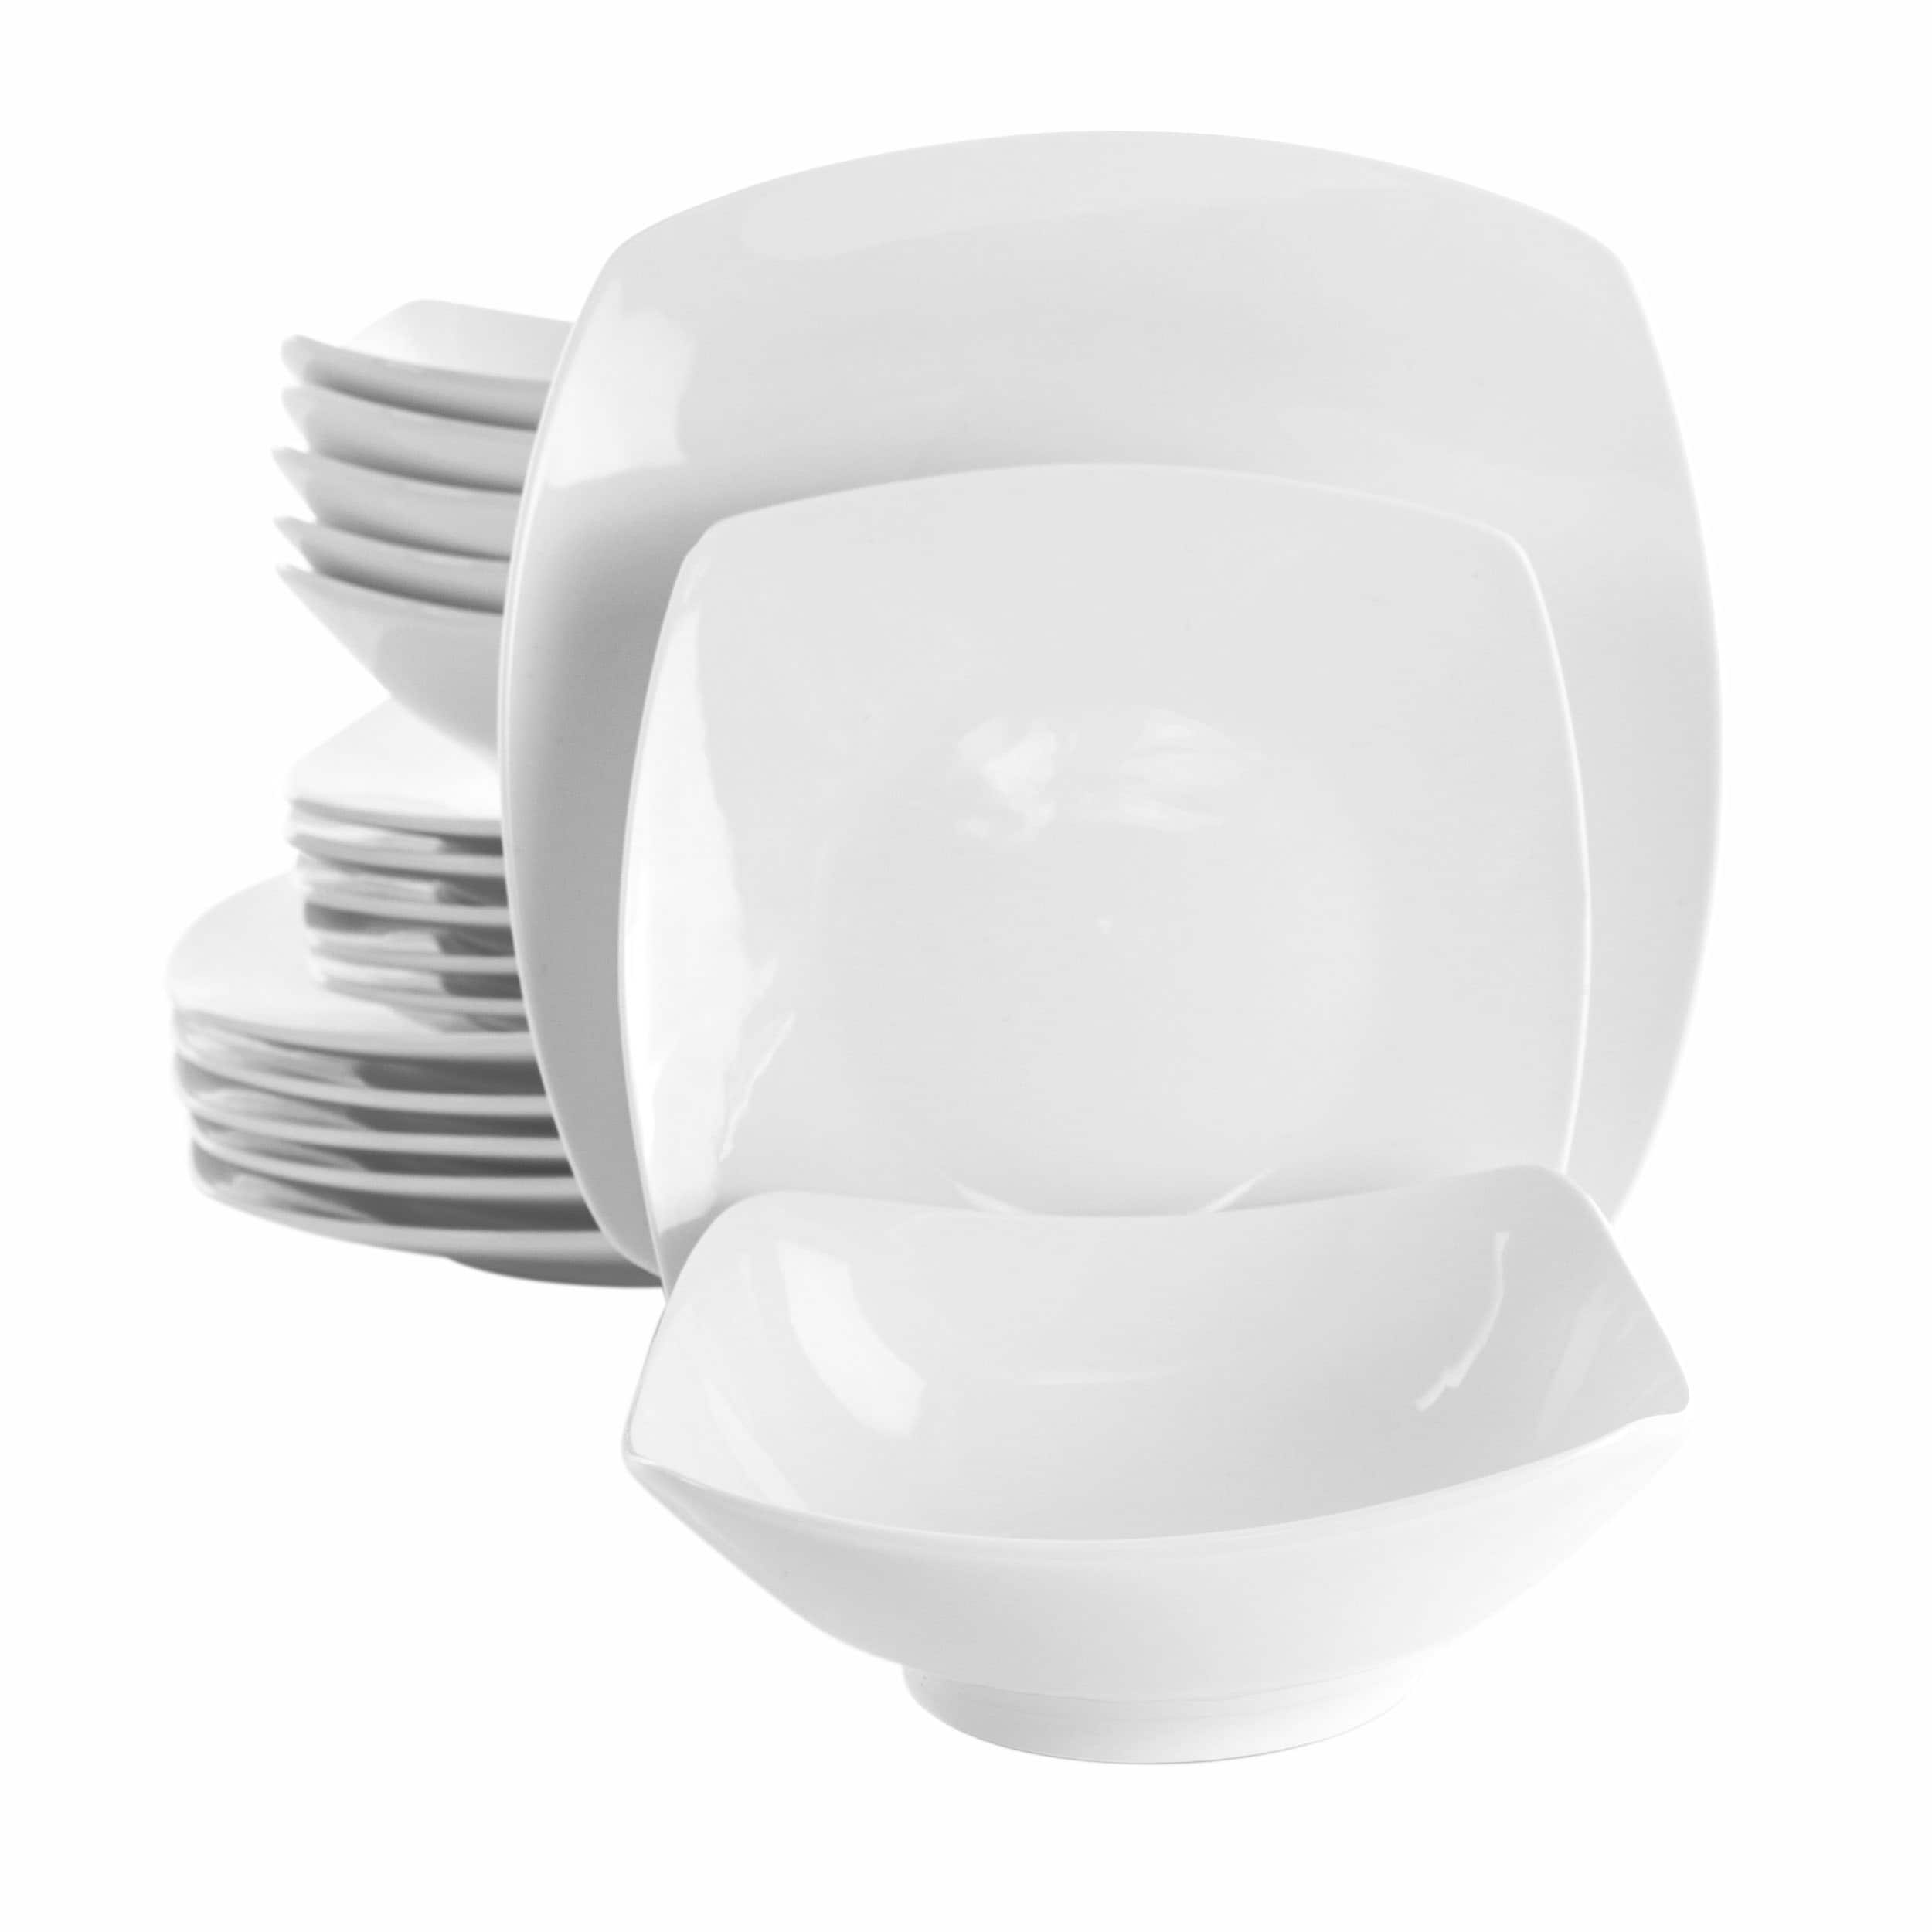 Elama Newman 18 Piece Square Porcelain Dinnerware Set in White - On Sale -  Bed Bath & Beyond - 32038499